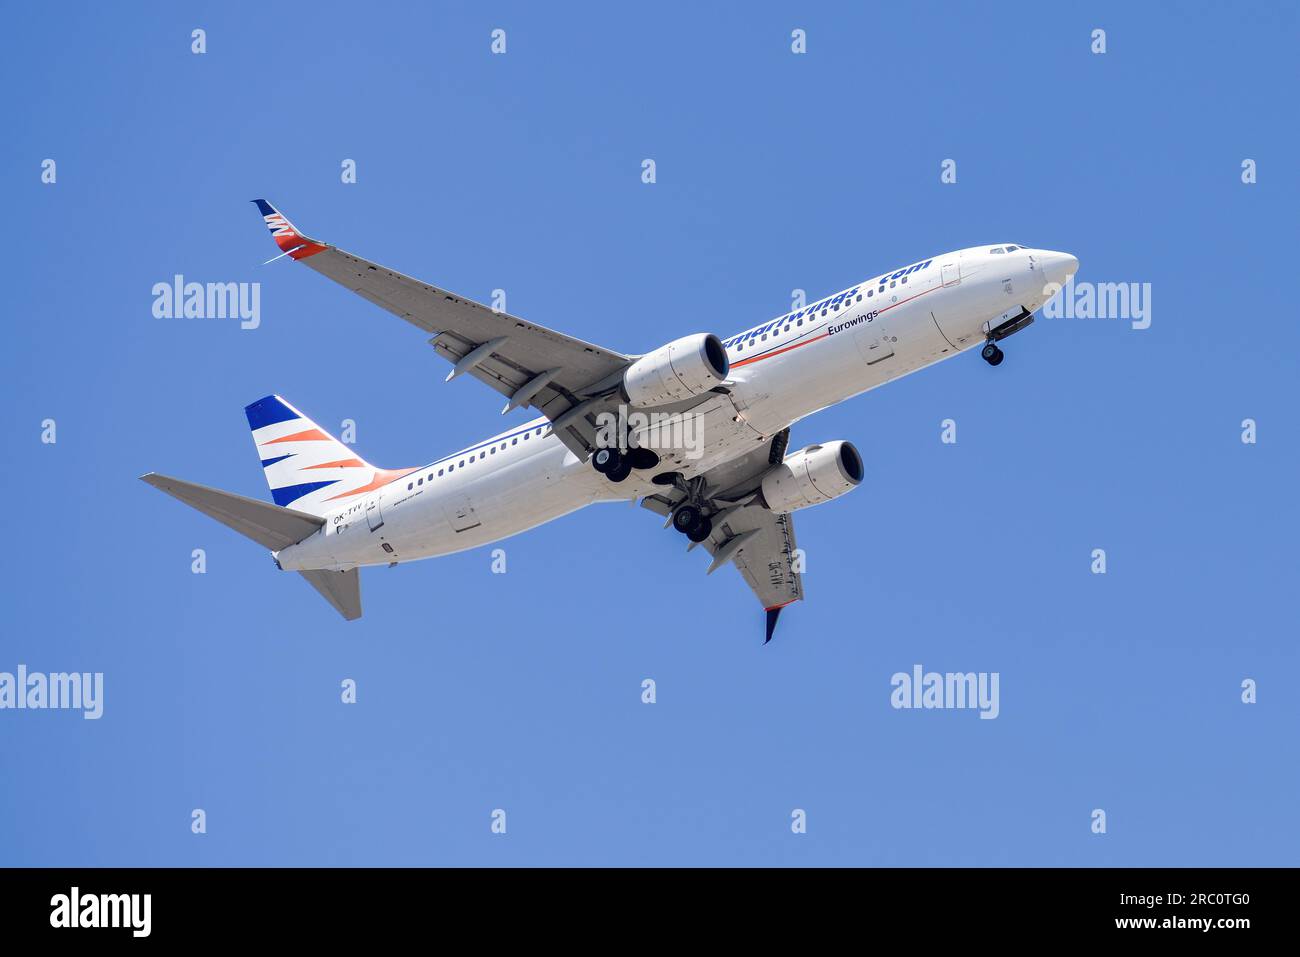 Lisbon, Portugal - July 12, 2023: Smartwings air company with aircraft Boeing 737-800 approaching to land at Lisbon International Airport against blue Stock Photo